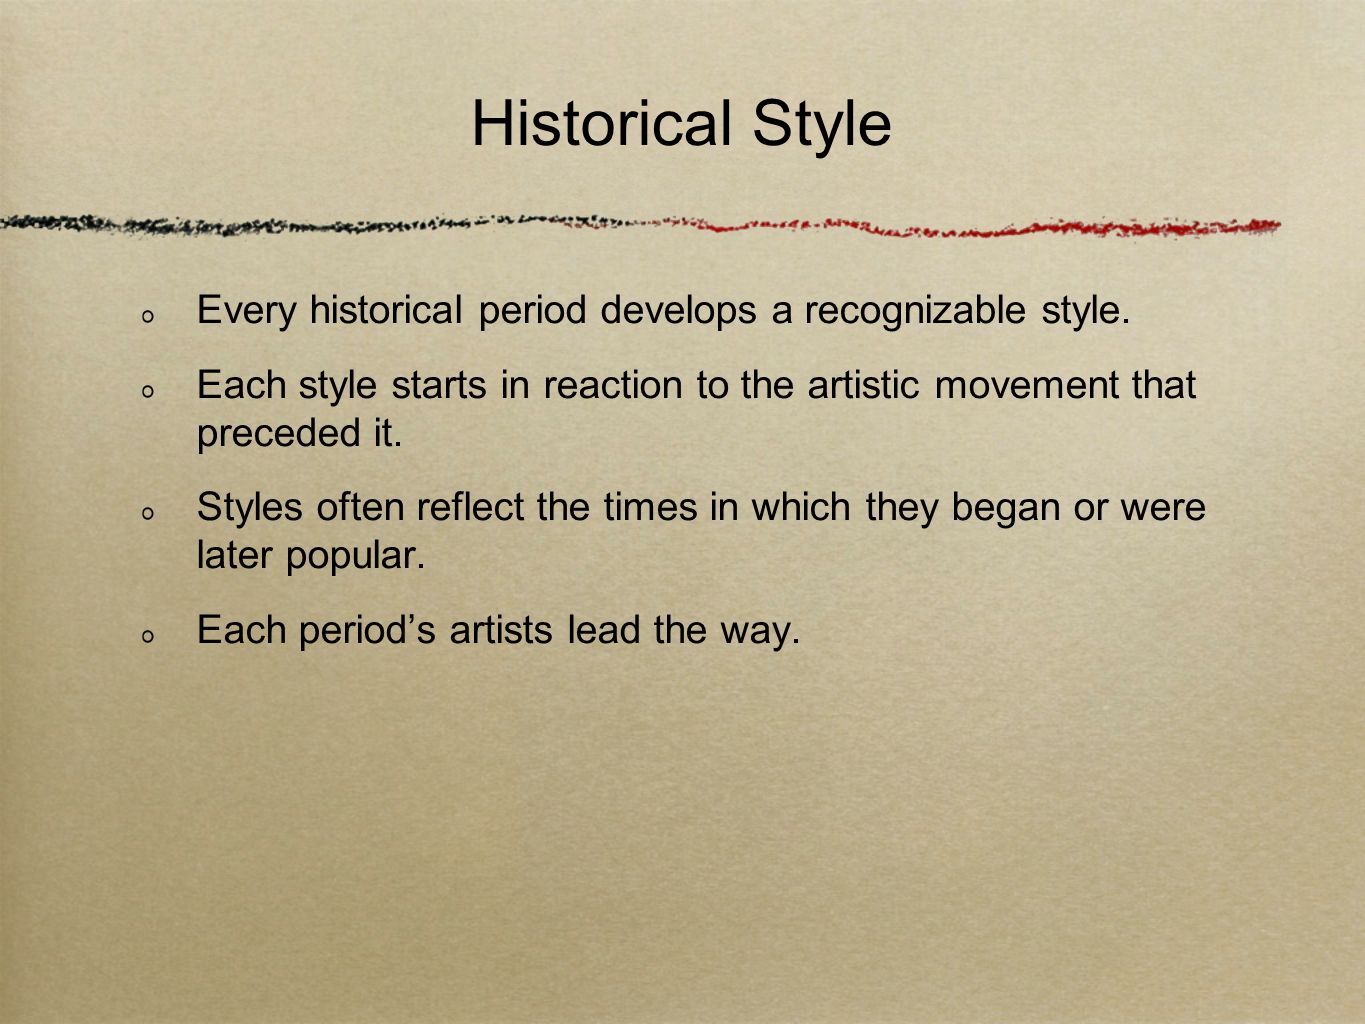 Historical Style Every historical period develops a recognizable style. Each style starts in reaction to the artistic movement that preceded it.